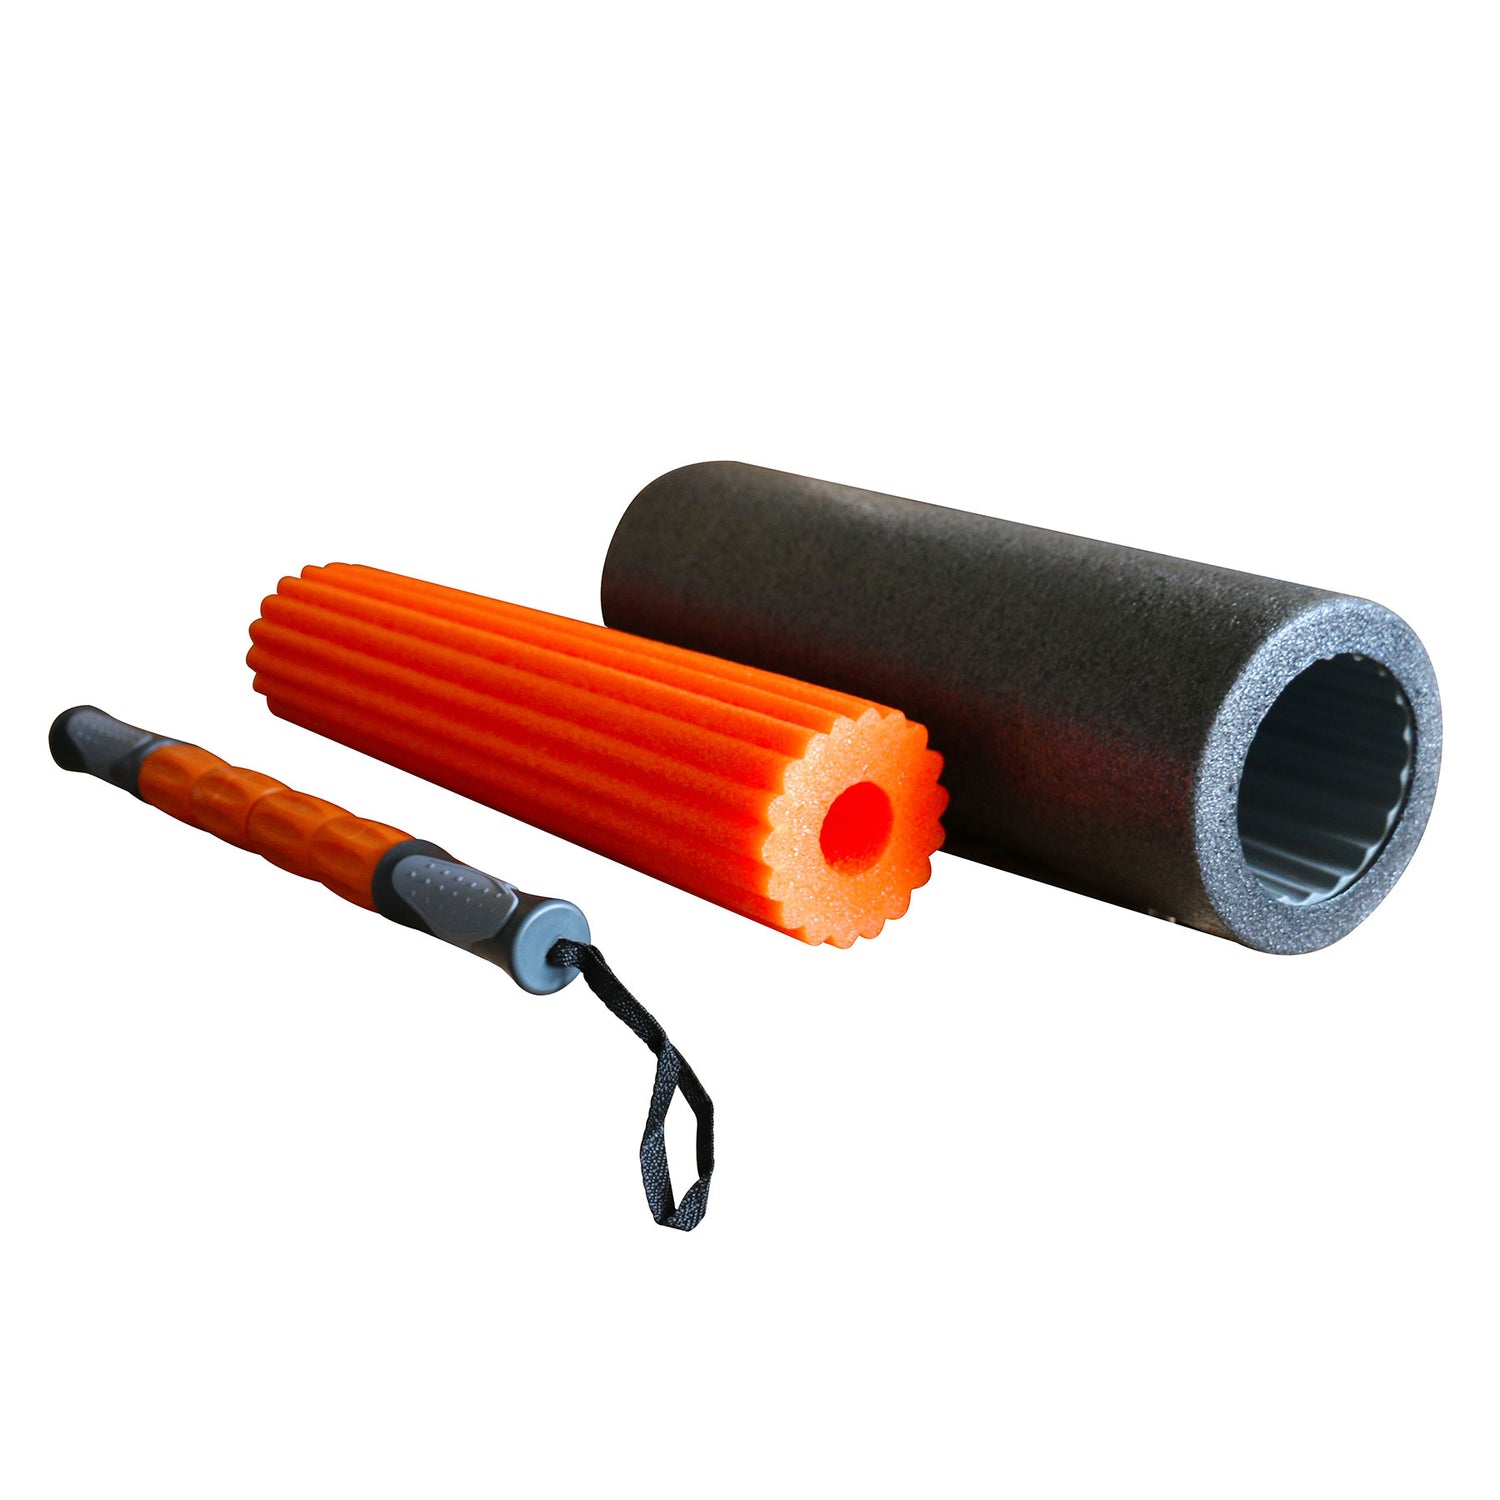 a 3 in 1 orange and black foam roller set with different densities